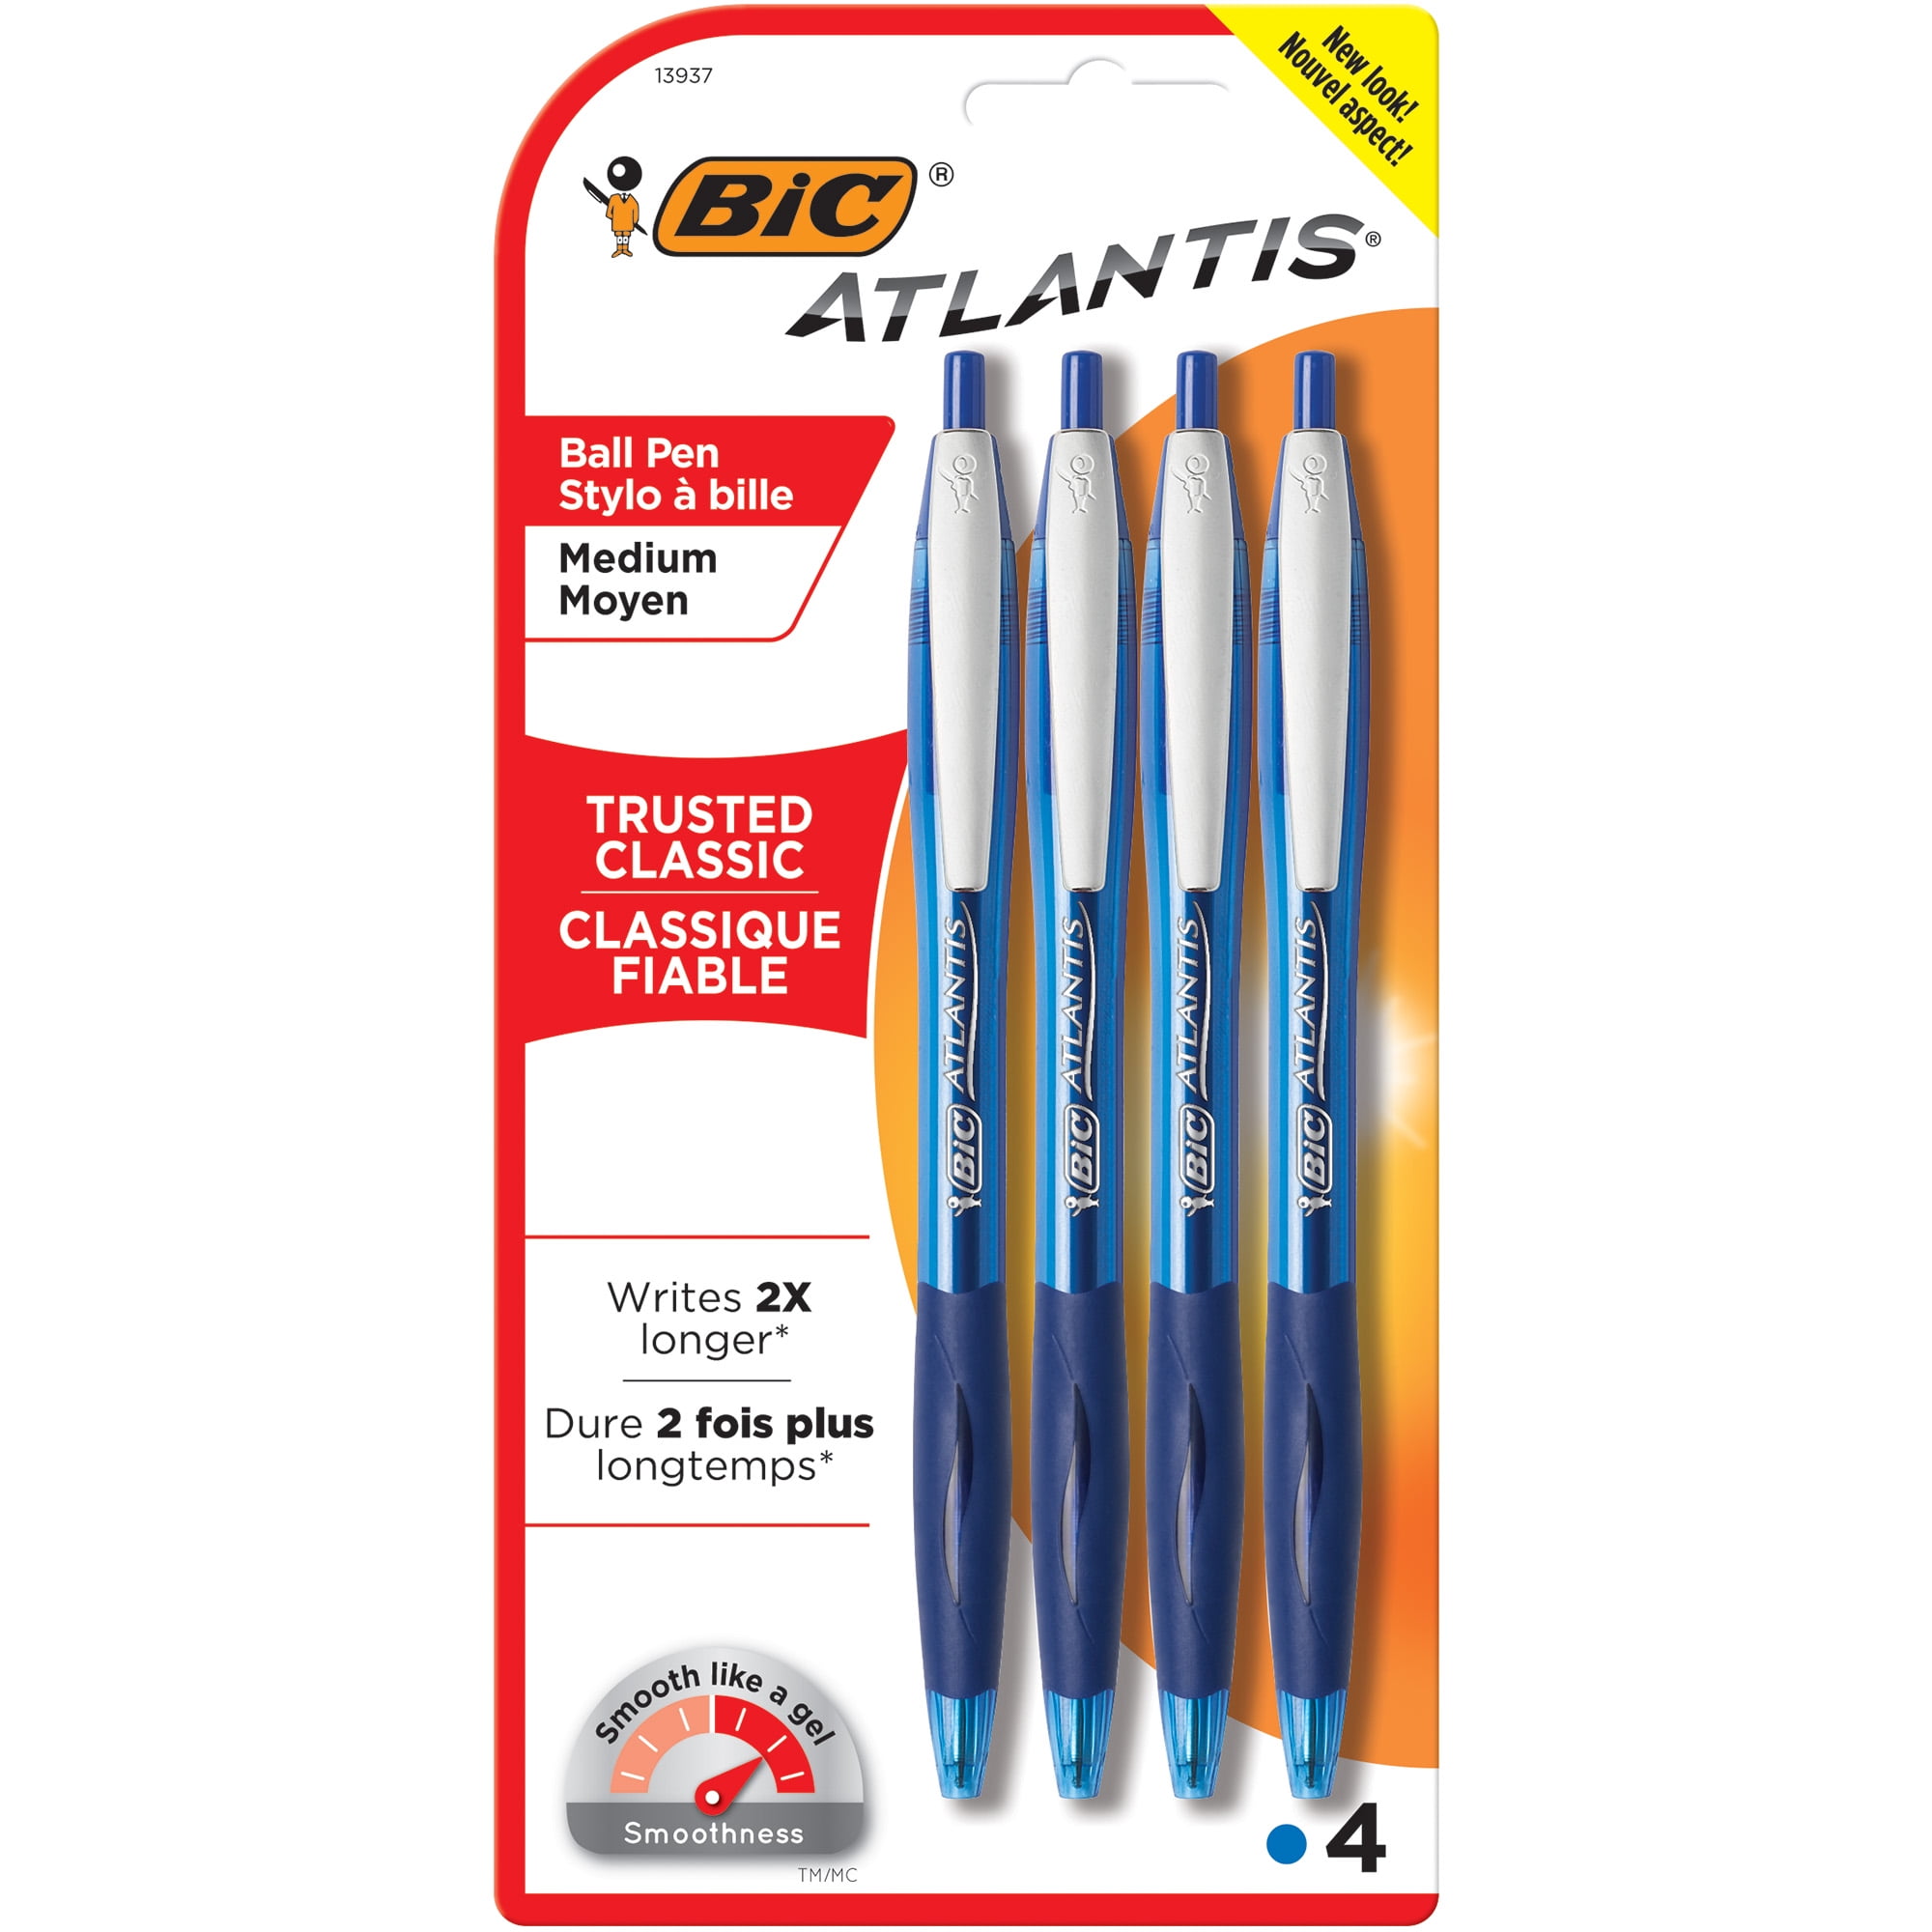 2 BLUE 1 BLACK AND 1 RED PEN 4 X PENS FINE WITH GLIDE EXTRA FOR SMOOTH WRITING 